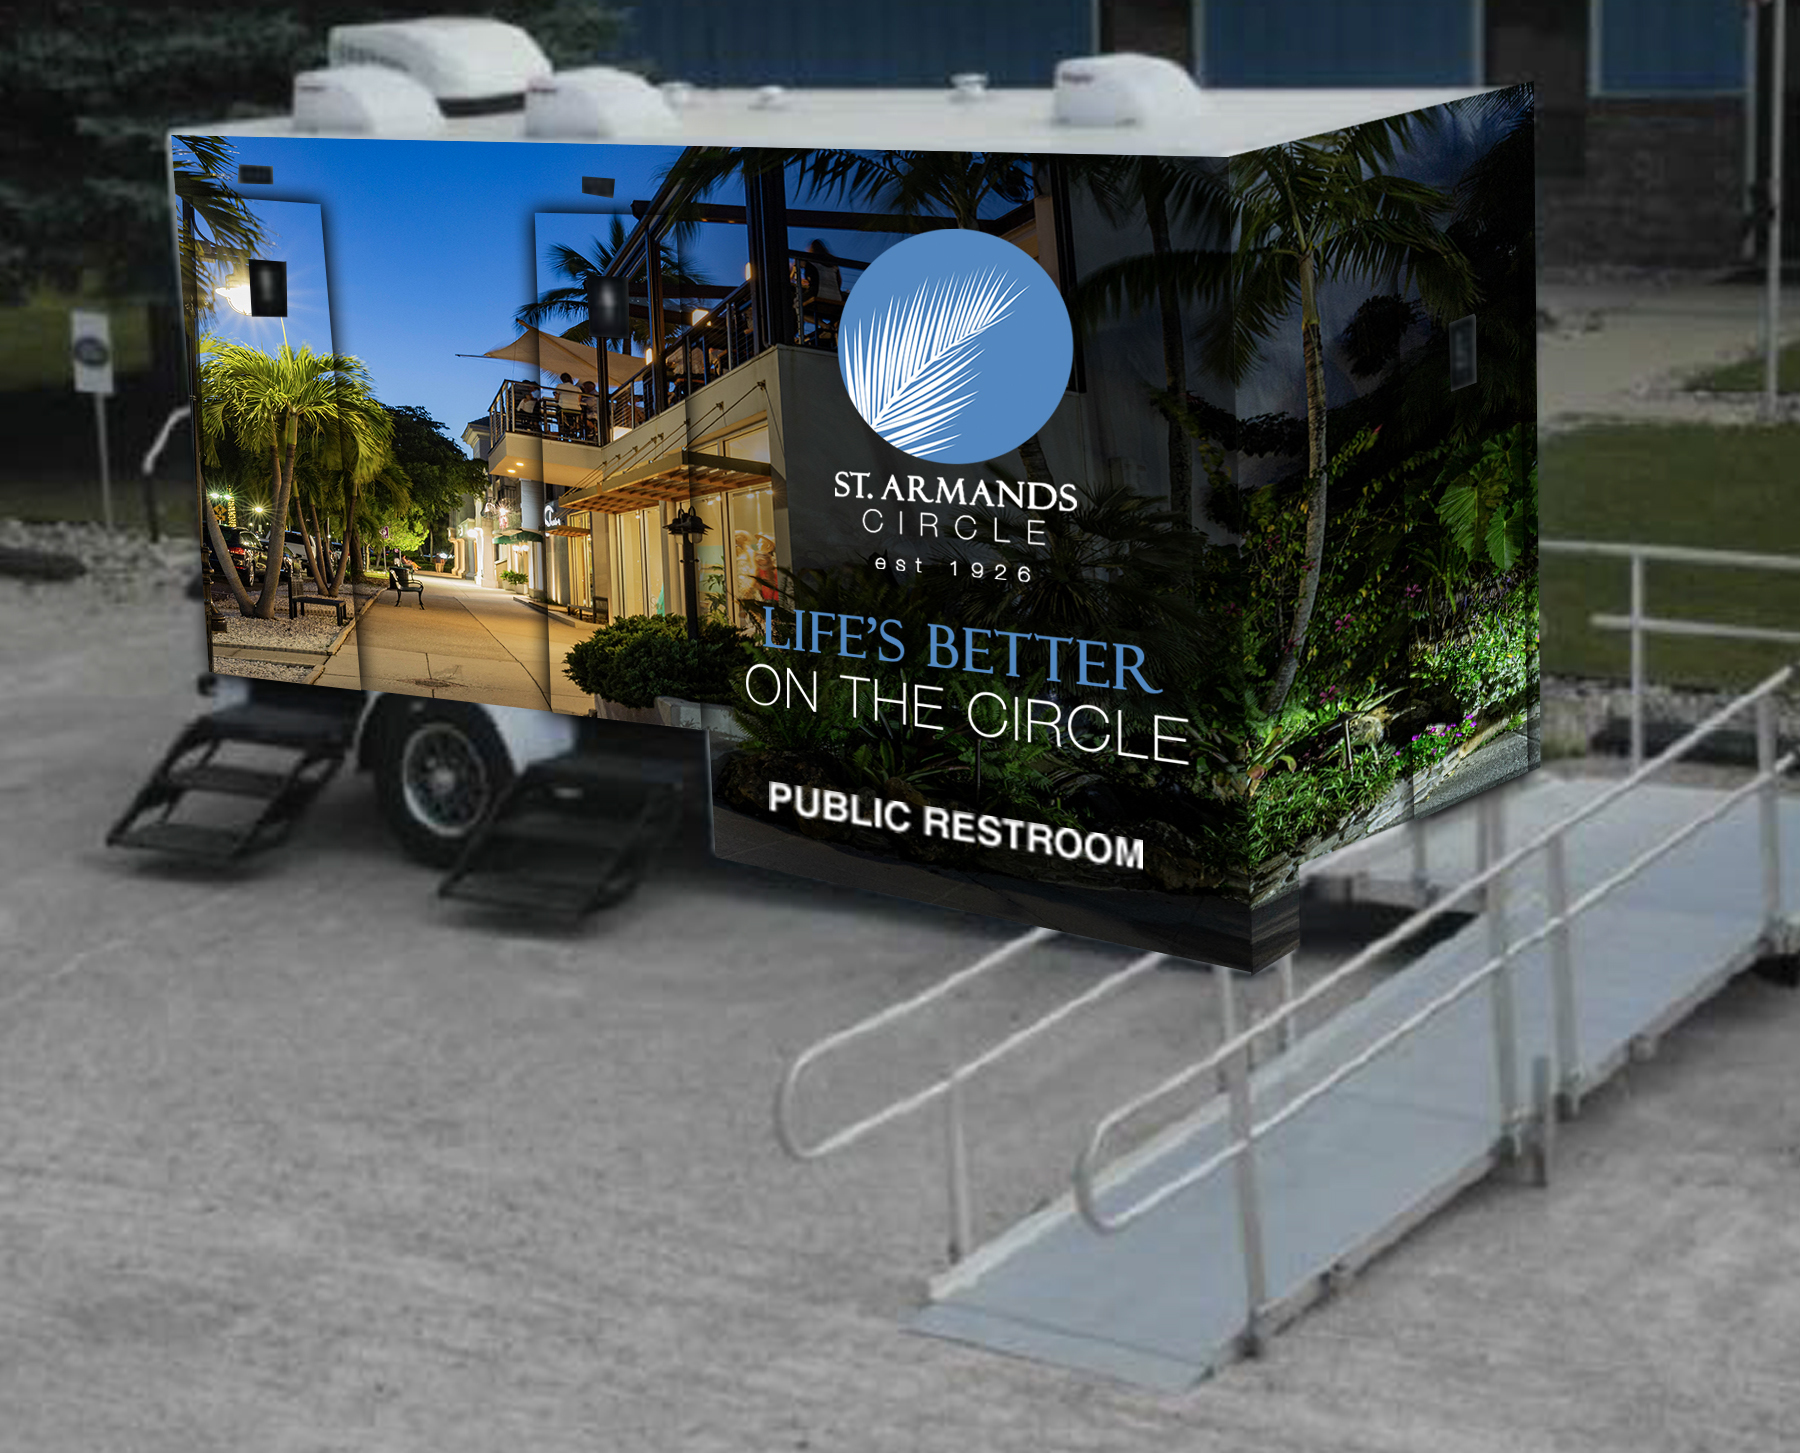 Marketing consultant Joe Grano provided concept images showcasing what a luxury restroom trailer could look like with custom skinning. Image courtesy Next-Mark.